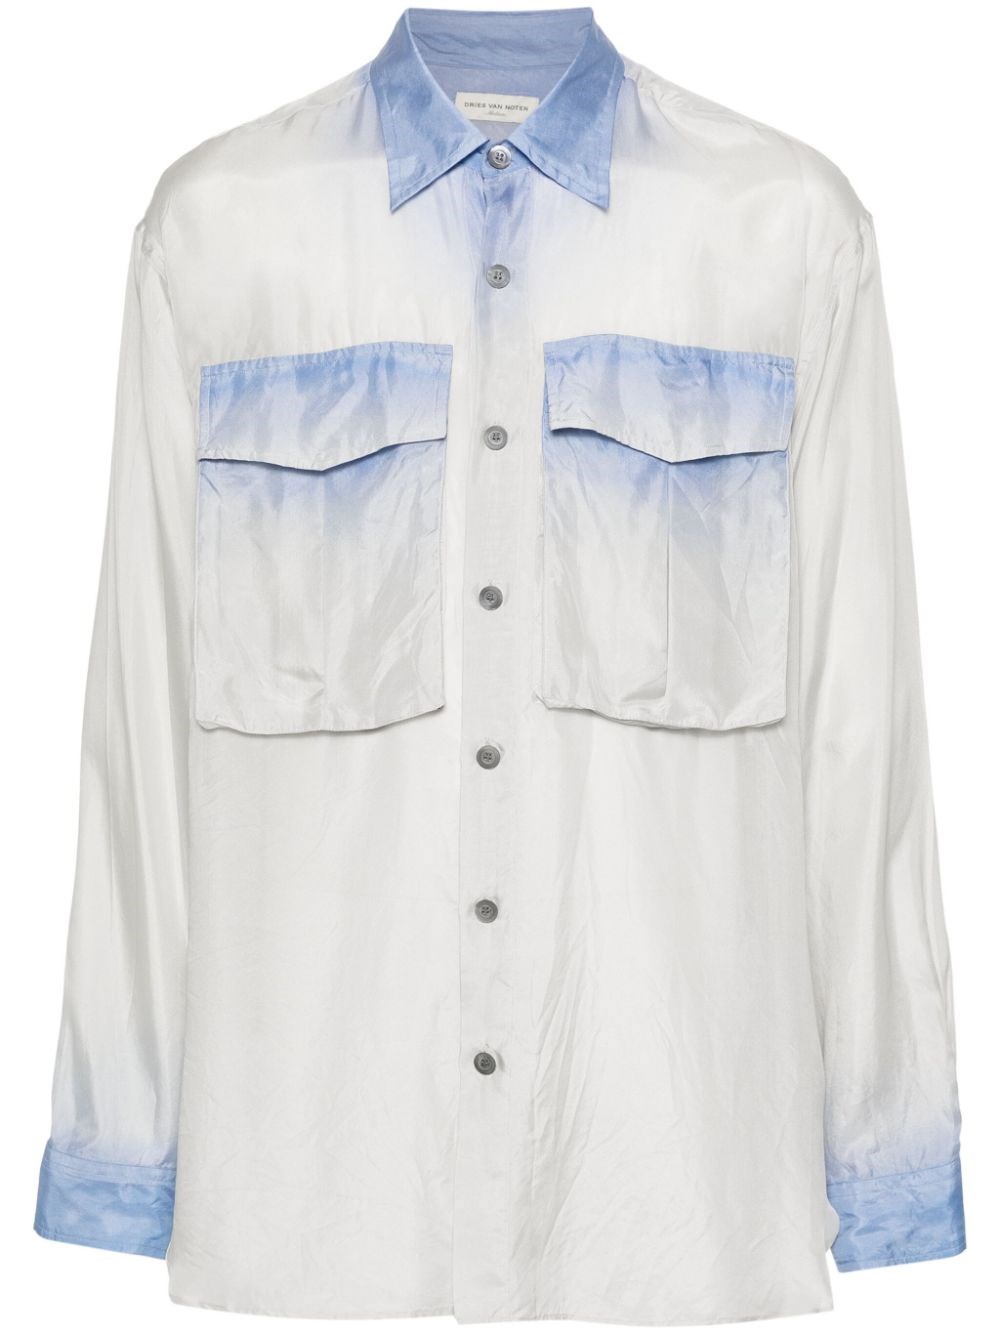 Shop Dries Van Noten Oversized Silk Shirt, With Shaded Effect. In Blue